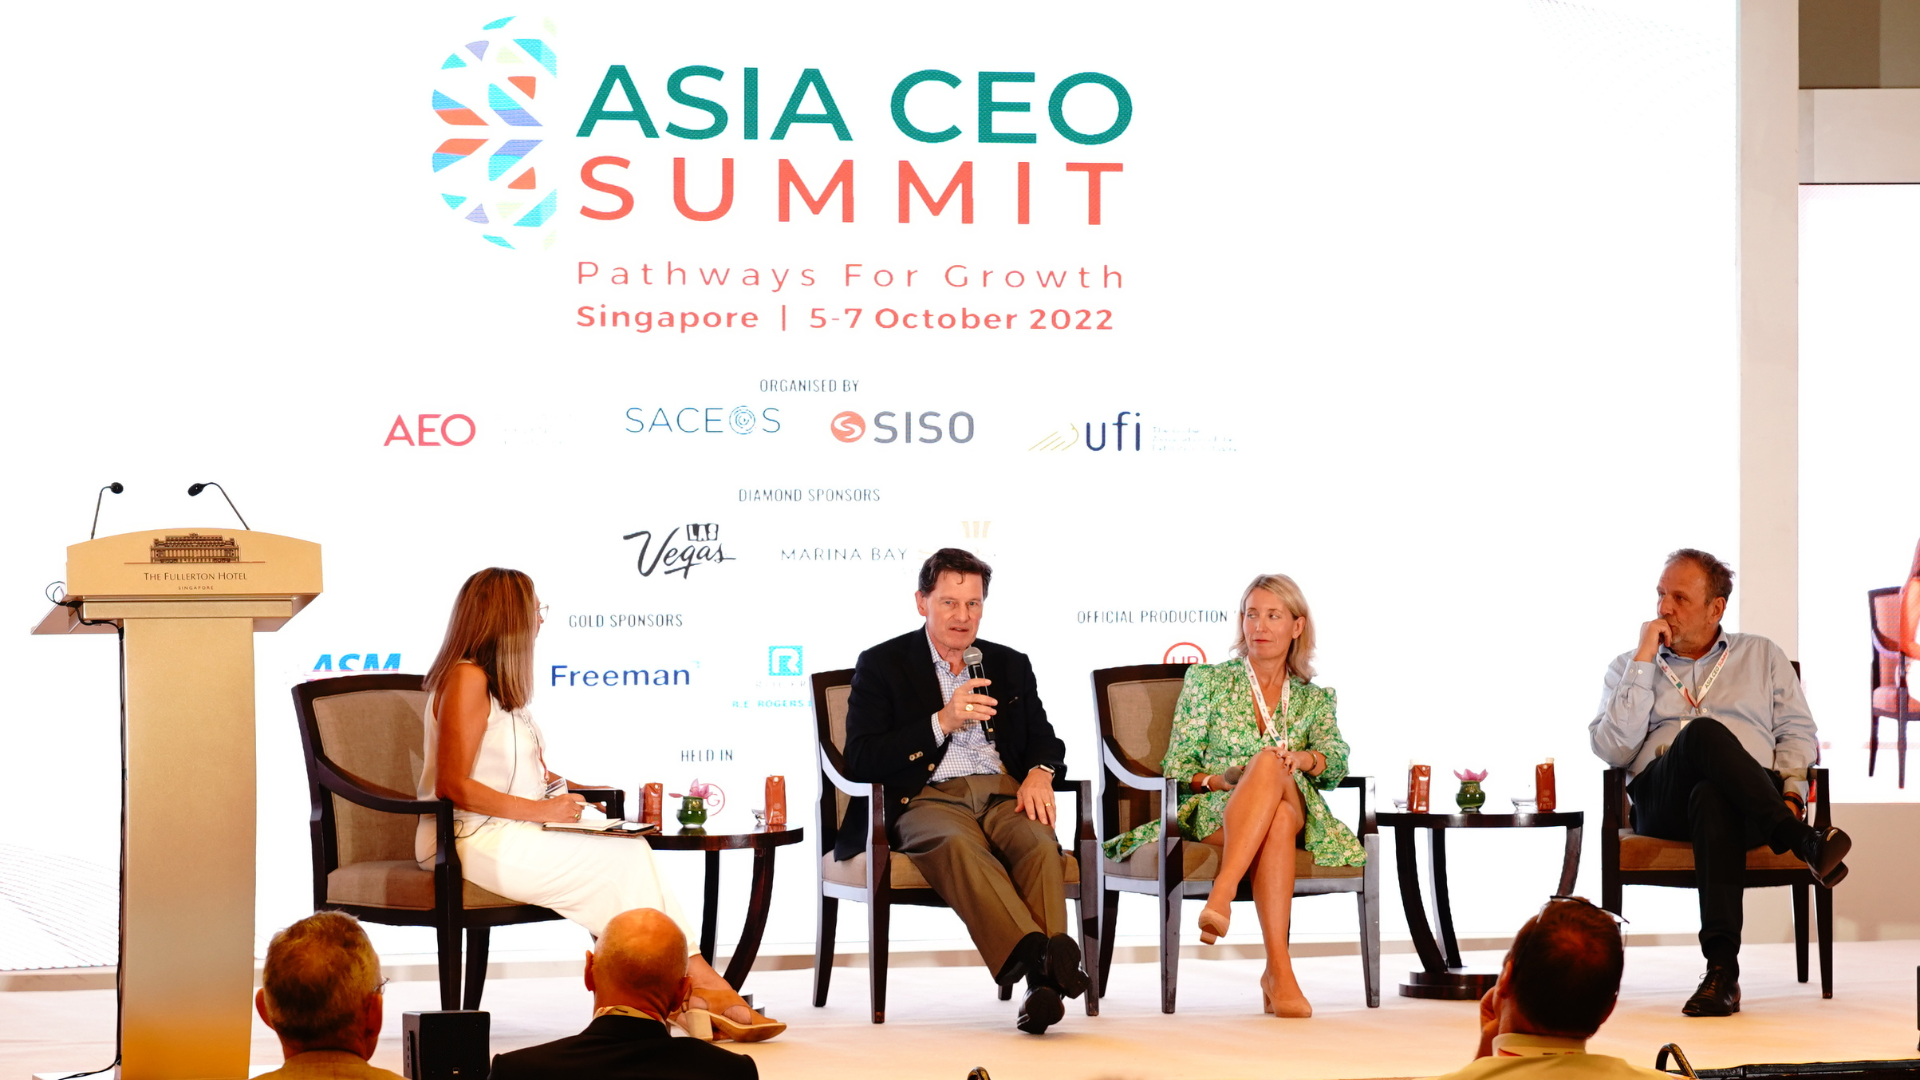 The inaugural Asia CEO Summit brings together the region’s business events leaders to chart the way forward for the industry in a post-Covid world.